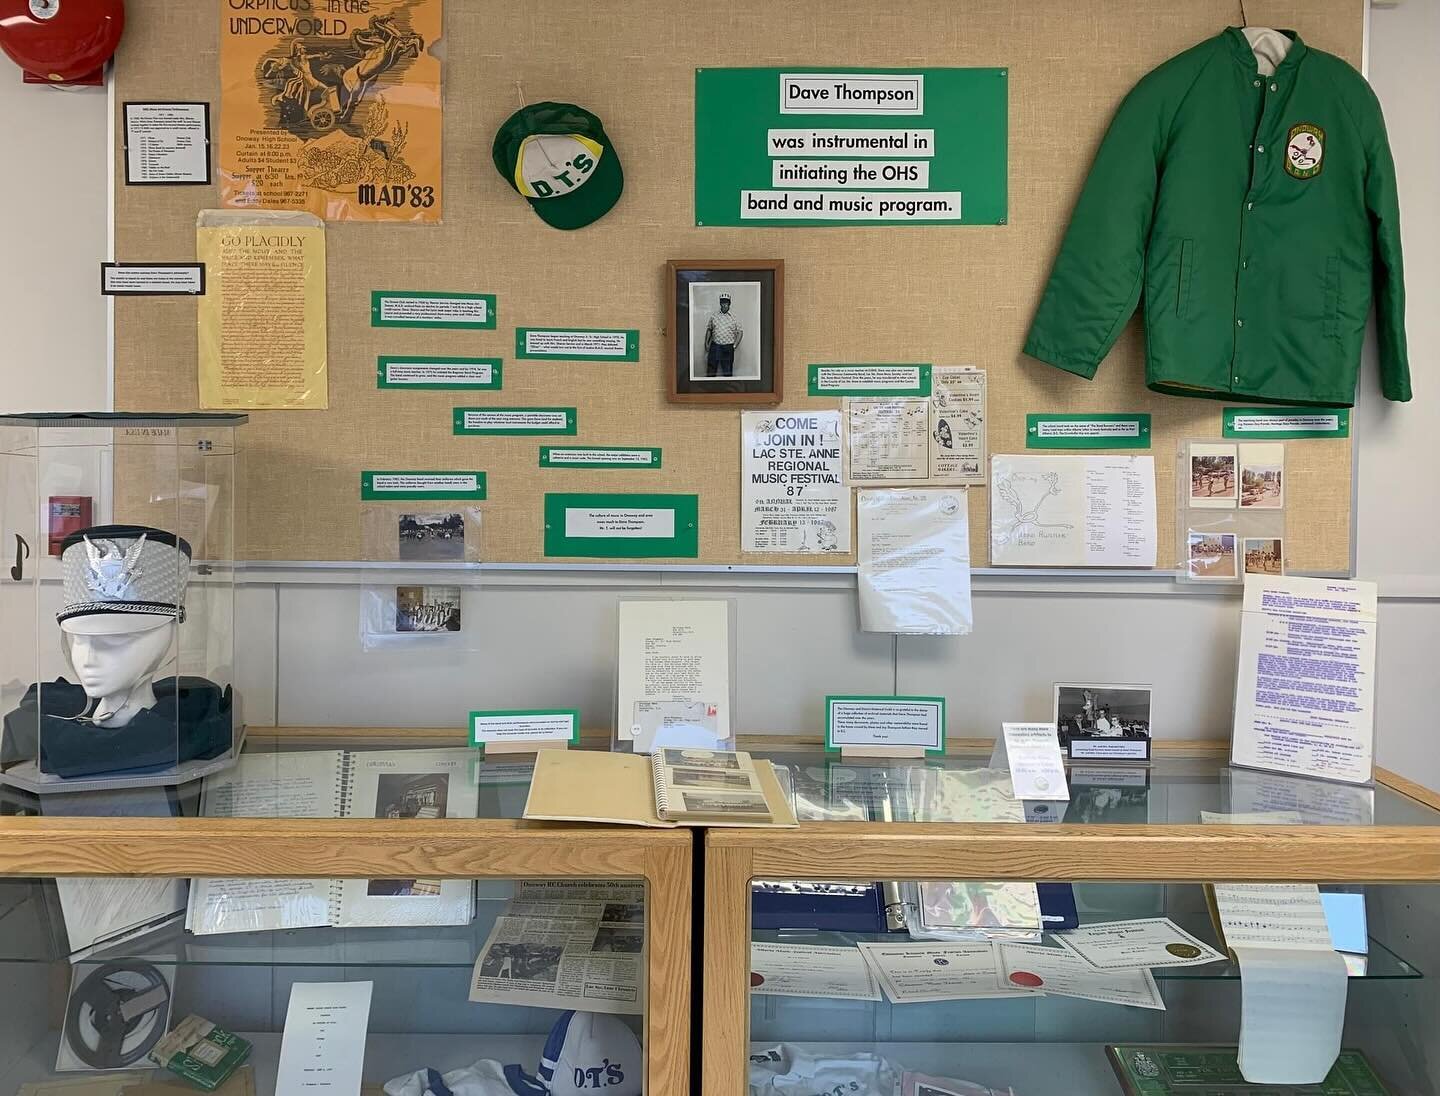 Visit the Onoway Museum and learn about Dave Thompson&rsquo;s impact on the Onoway High School band and music program! 🎼

#onoway #onowaymuseum #museum #history #alberta #albertamuseums #travelalberta #band #music